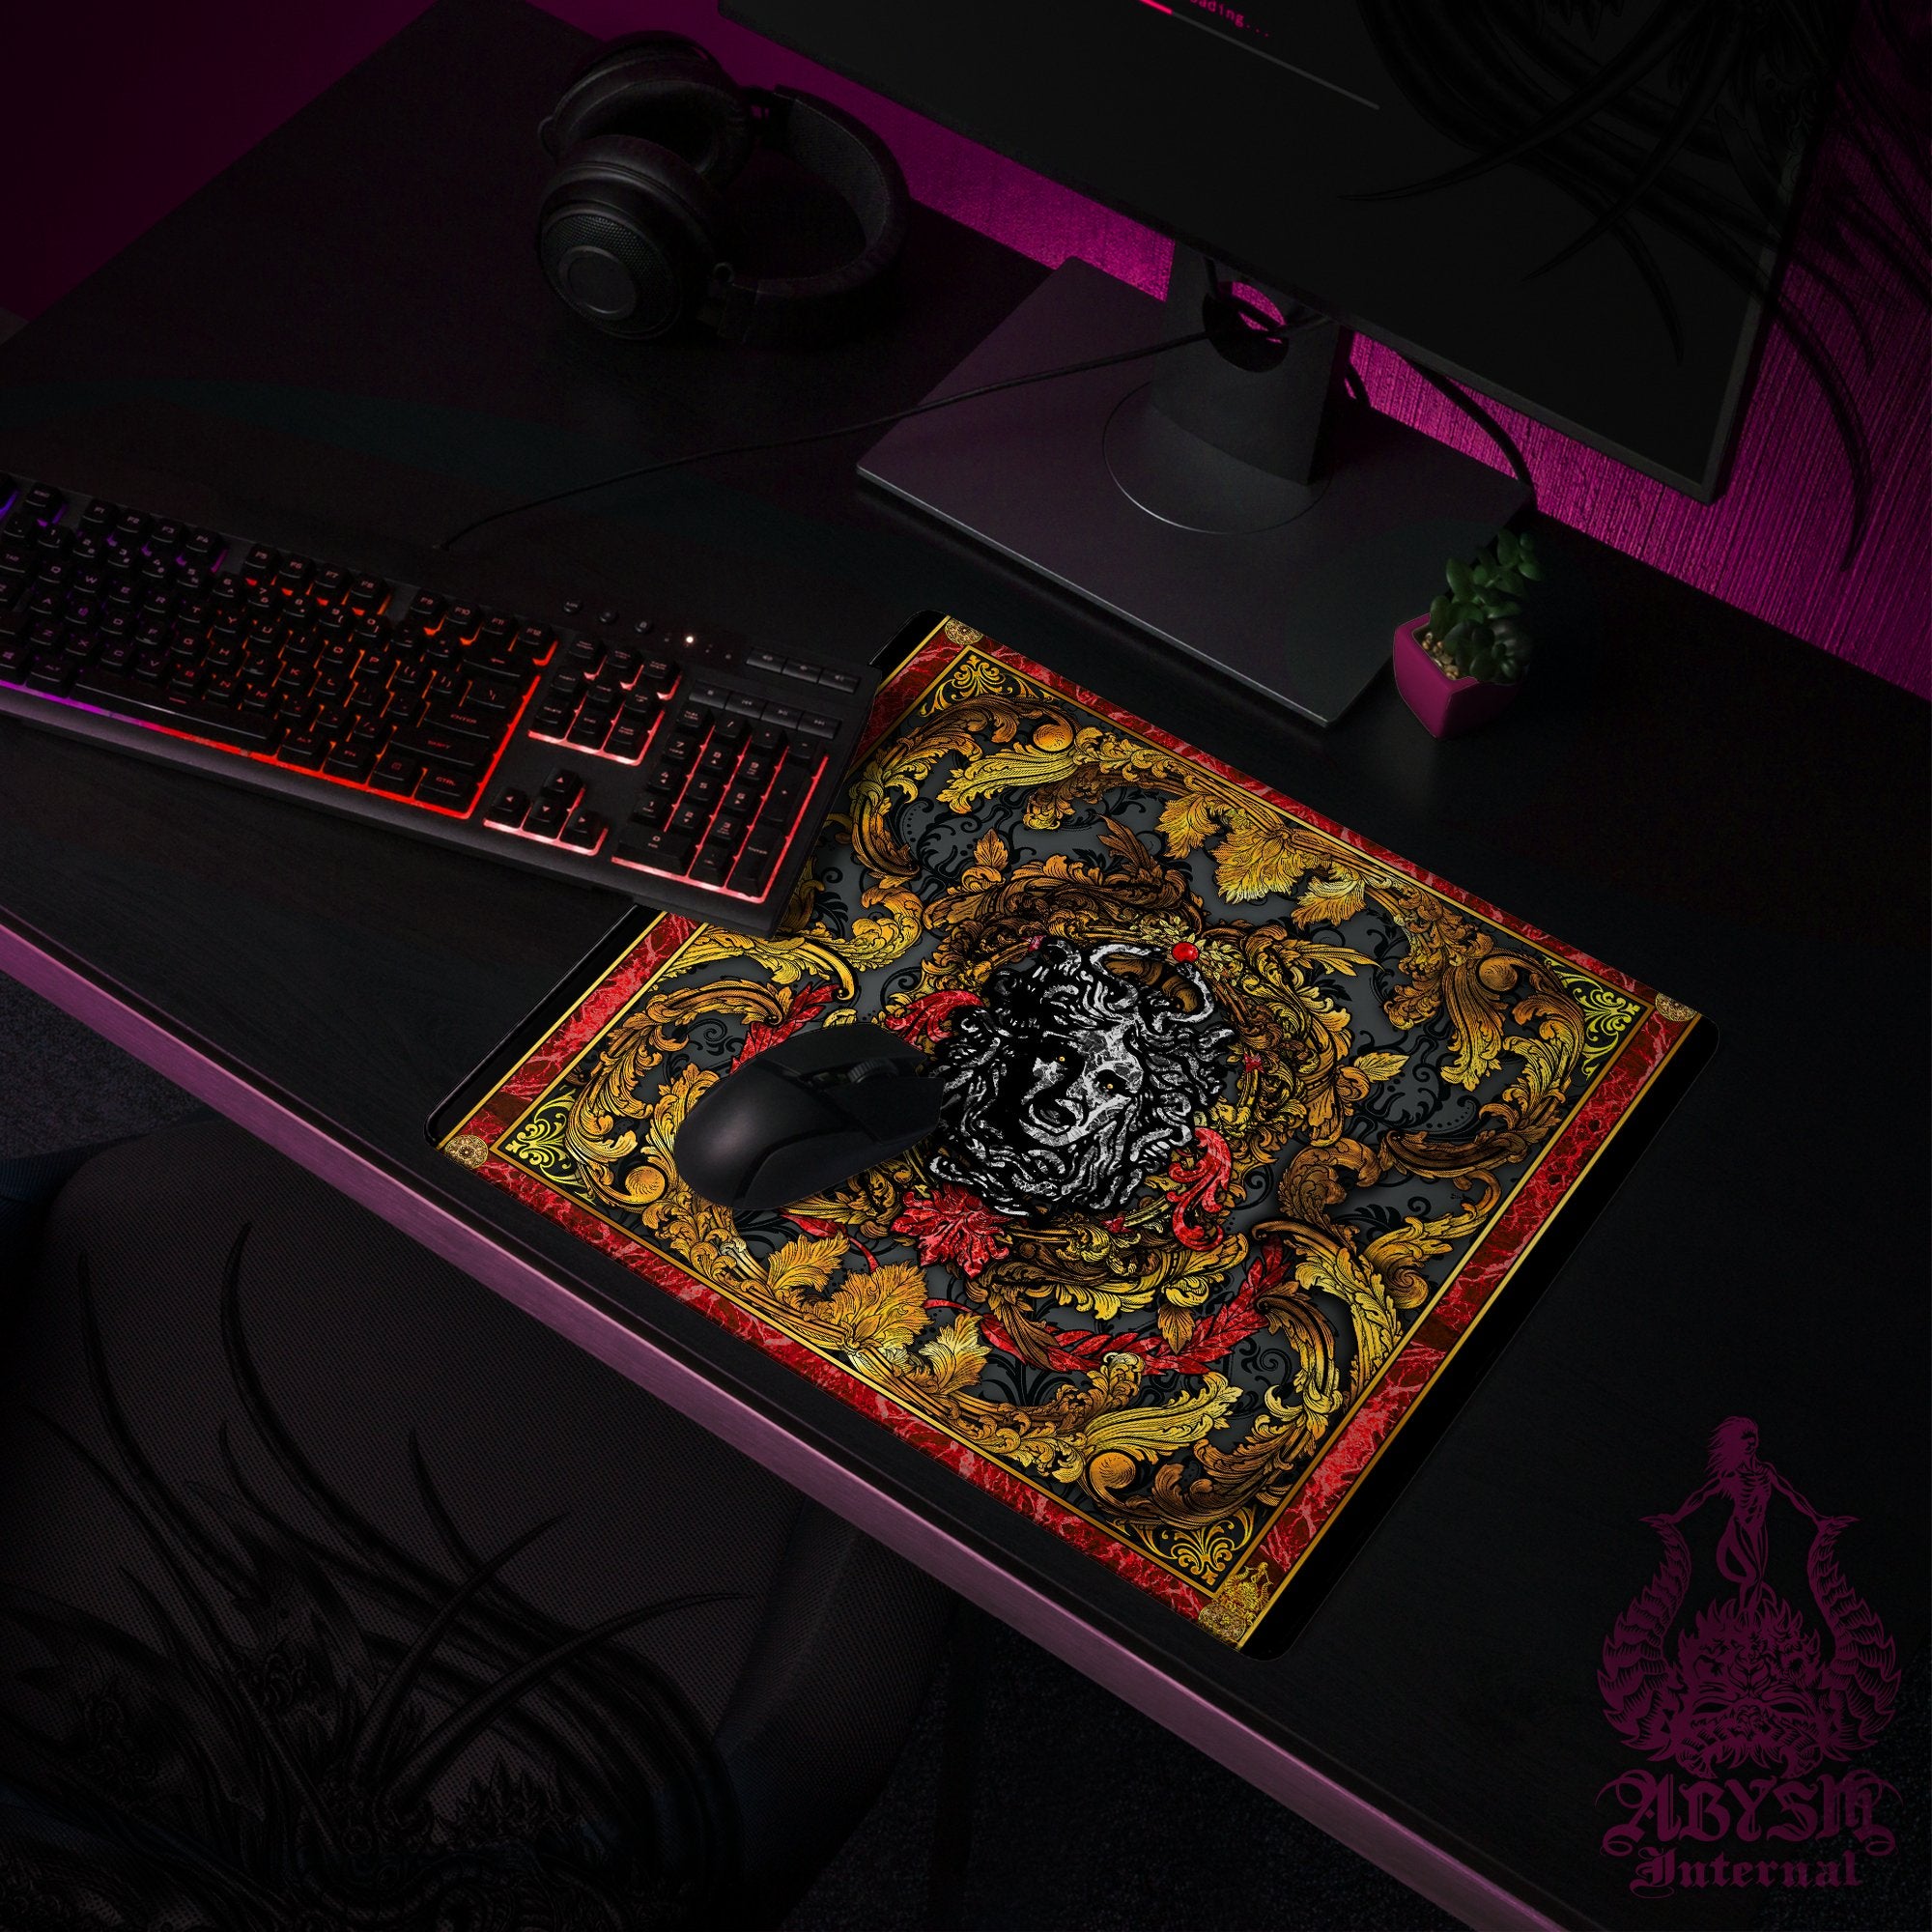 Medusa Mouse Pad, Ornamented Gaming Desk Mat, Baroque Workpad, Vintage Table Protector Cover, Art Print - Abysm Internal